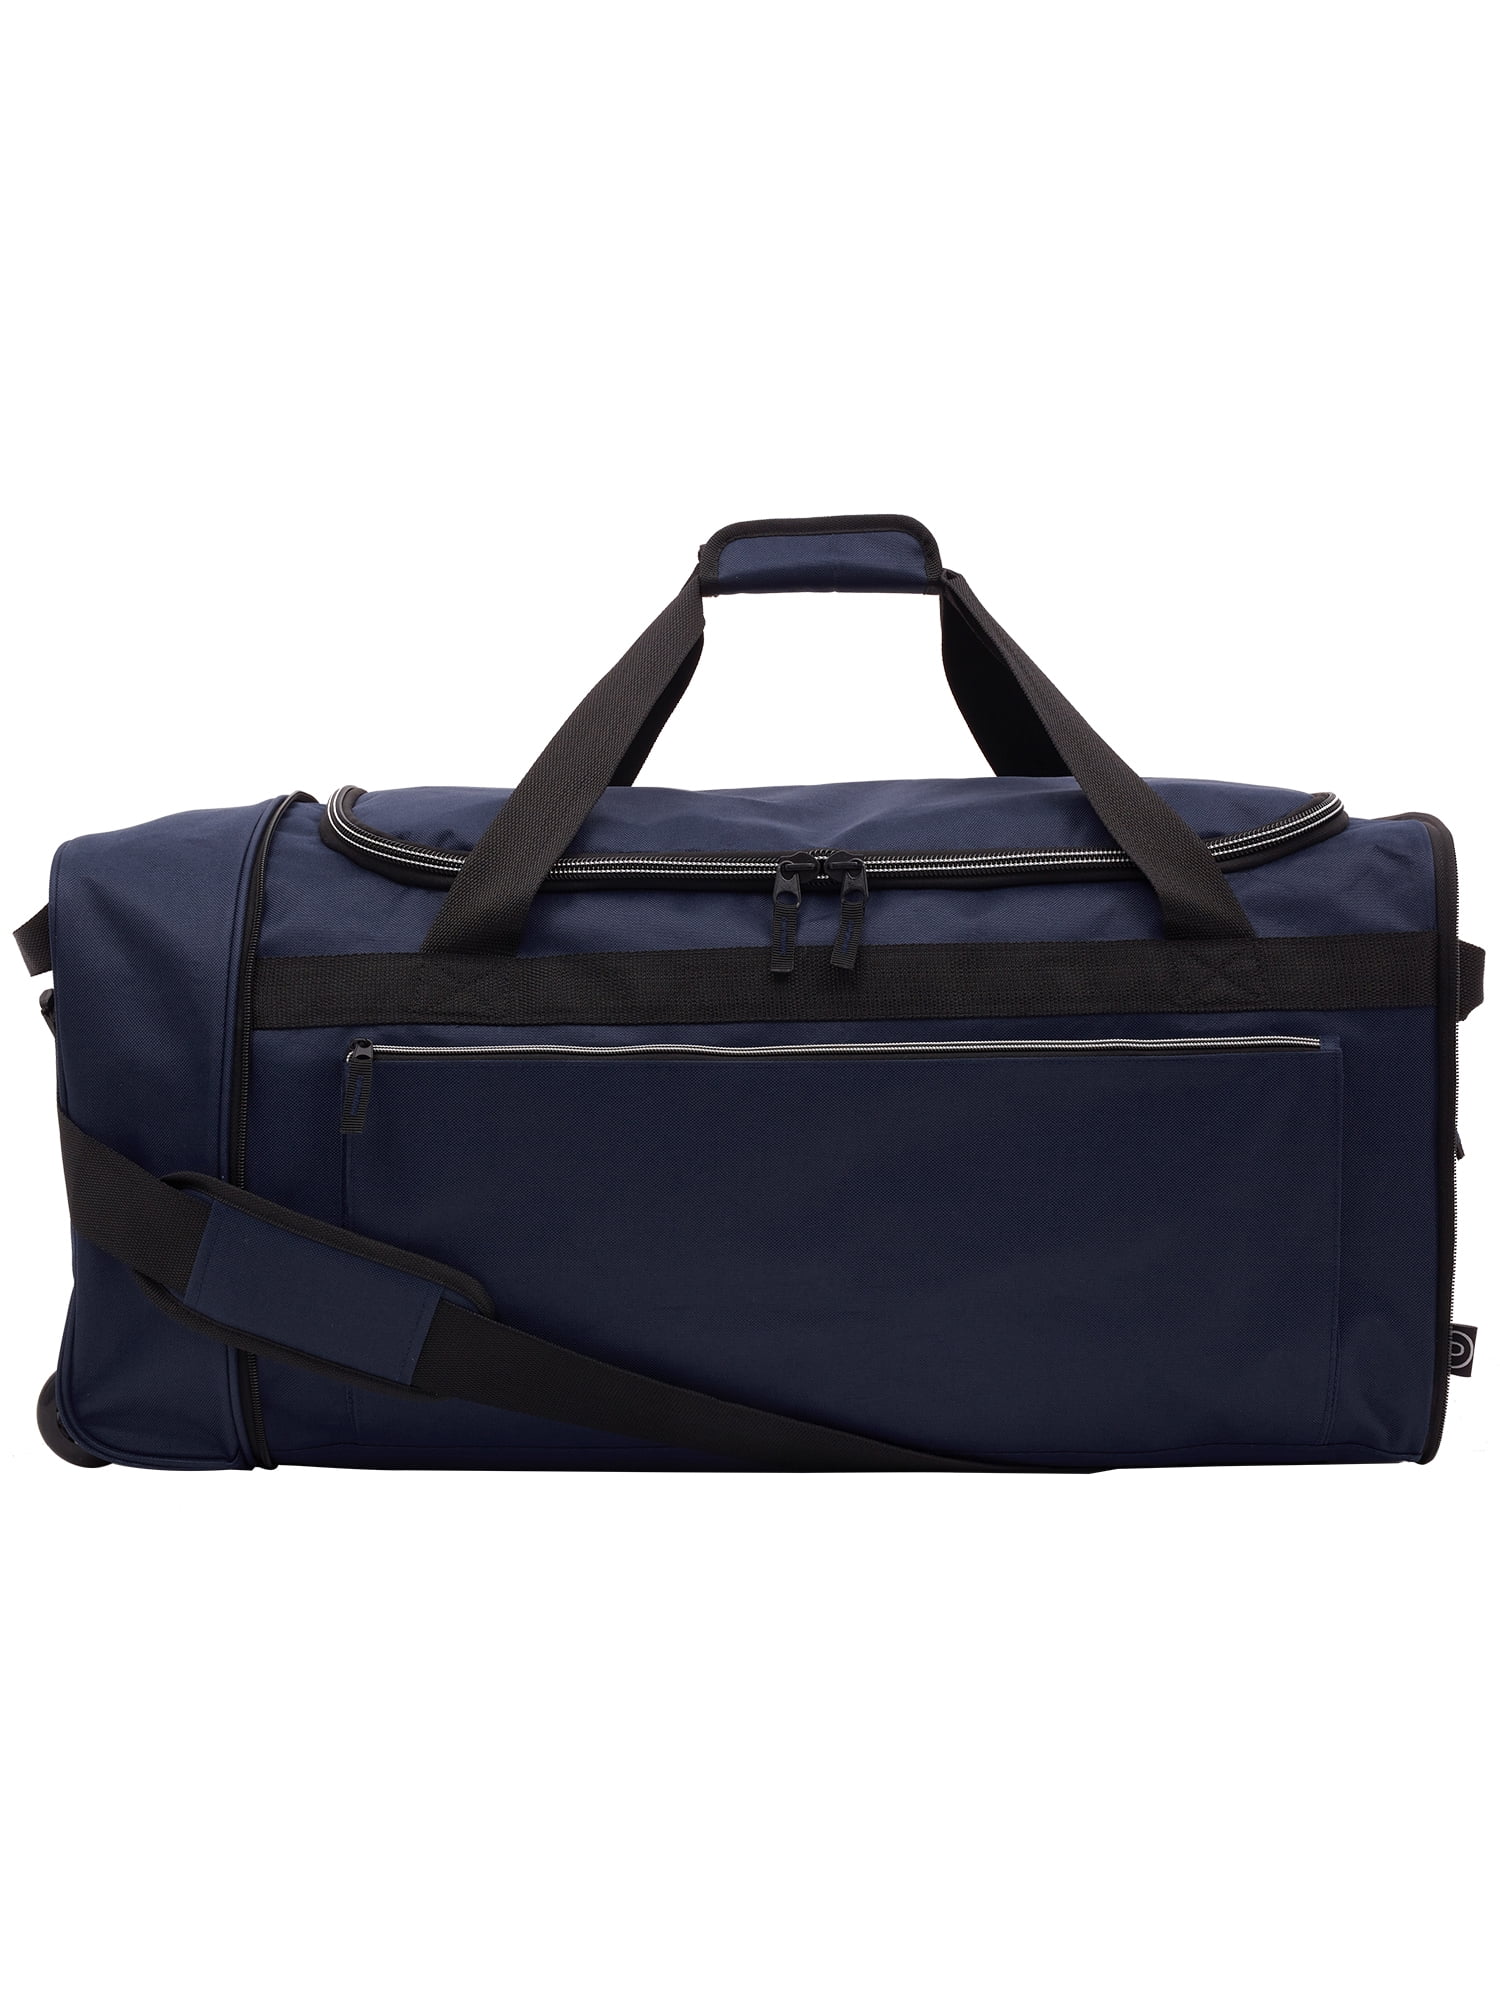 Protégé 28 Polyester Rolling Collapsible Duffel Bag, Navy Blue 